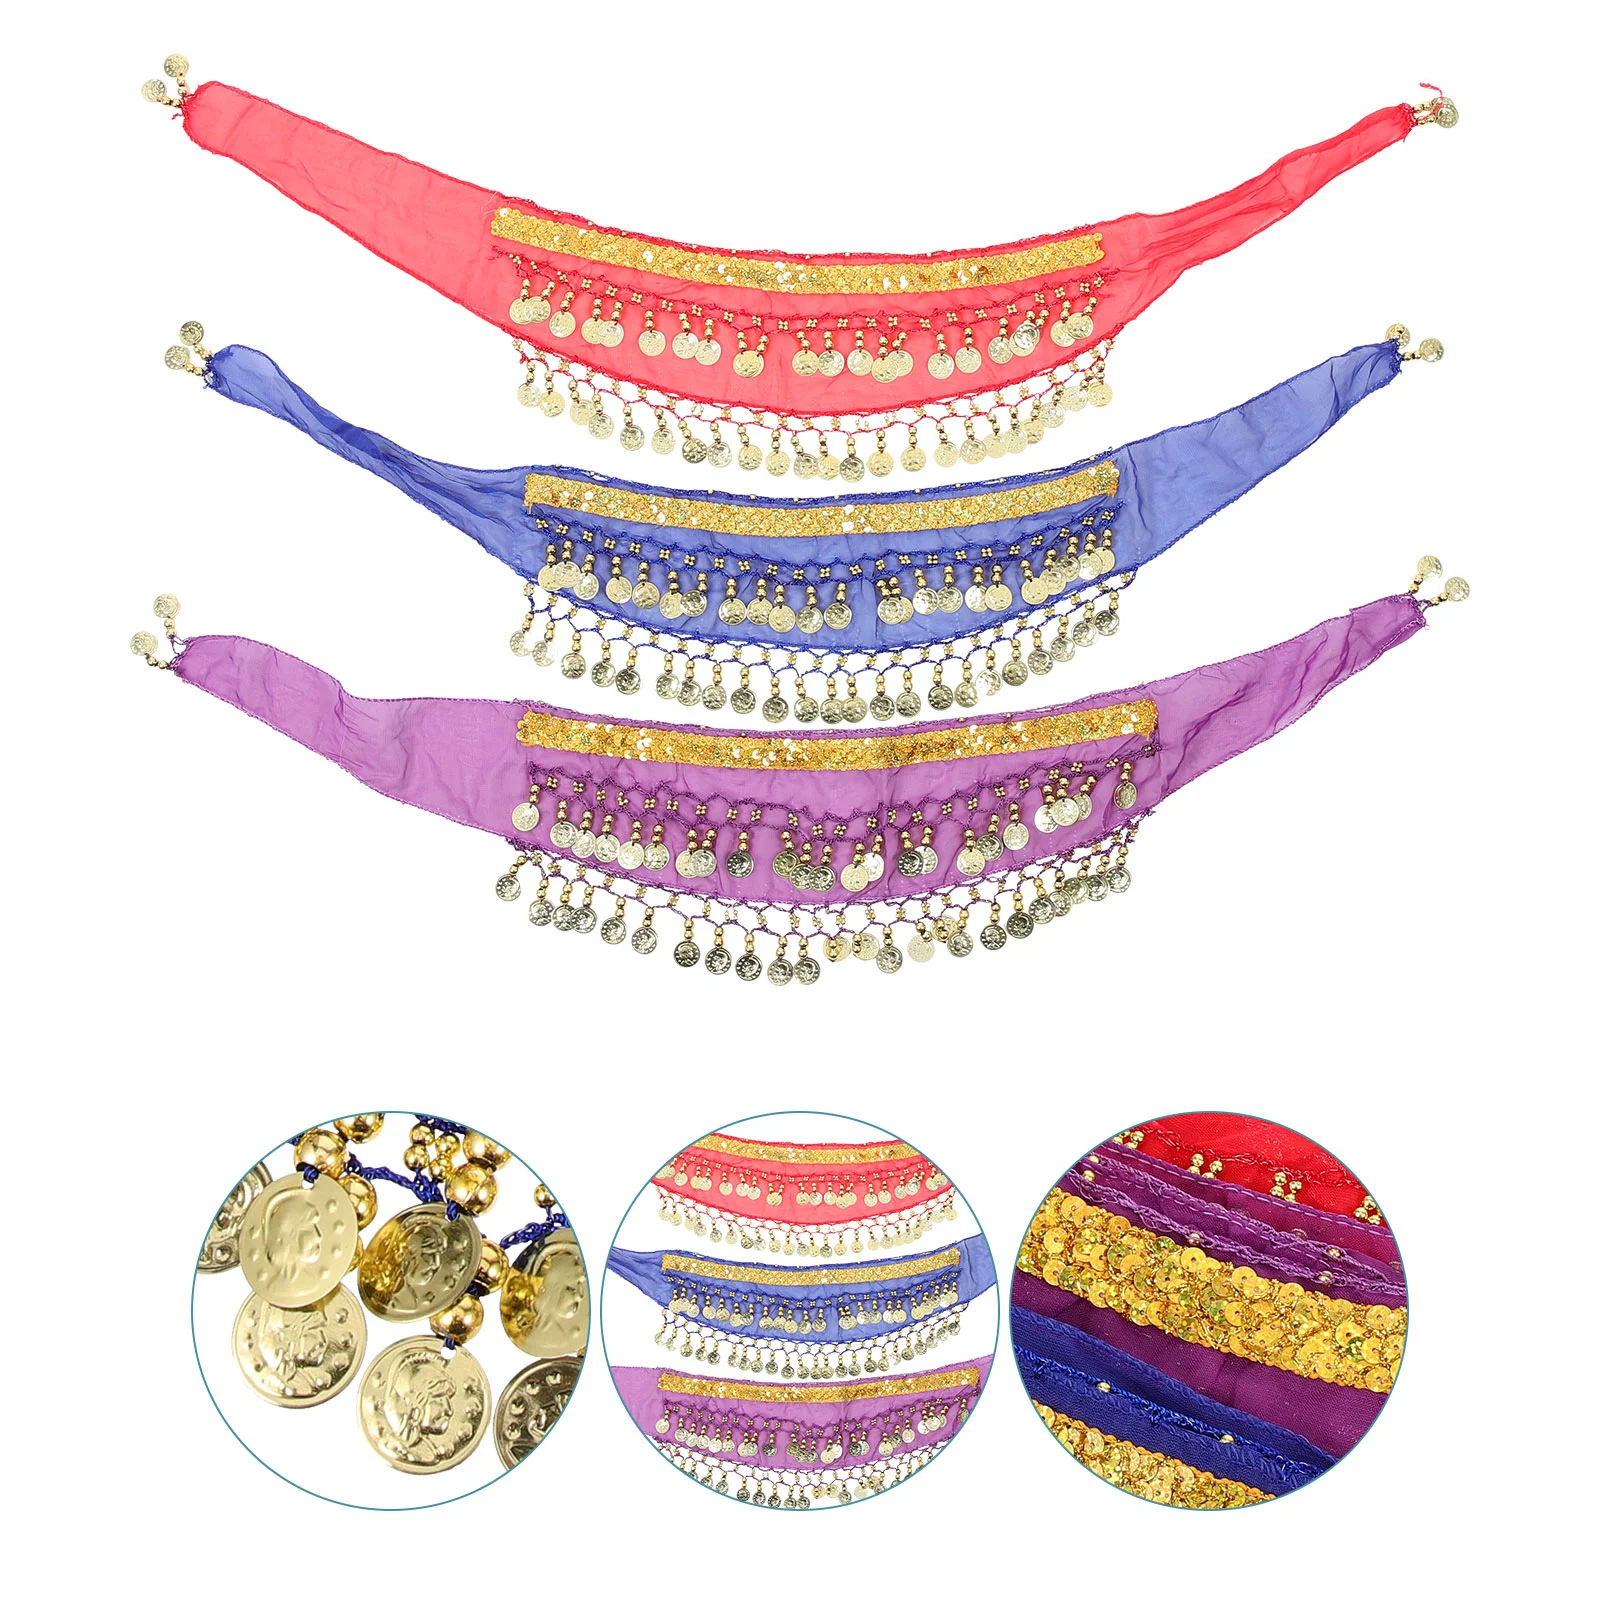 

3pcs Belly Dancing Hip Scarves Little Girls Dance Costume Accessory Waist Scarf with Dangling Coins